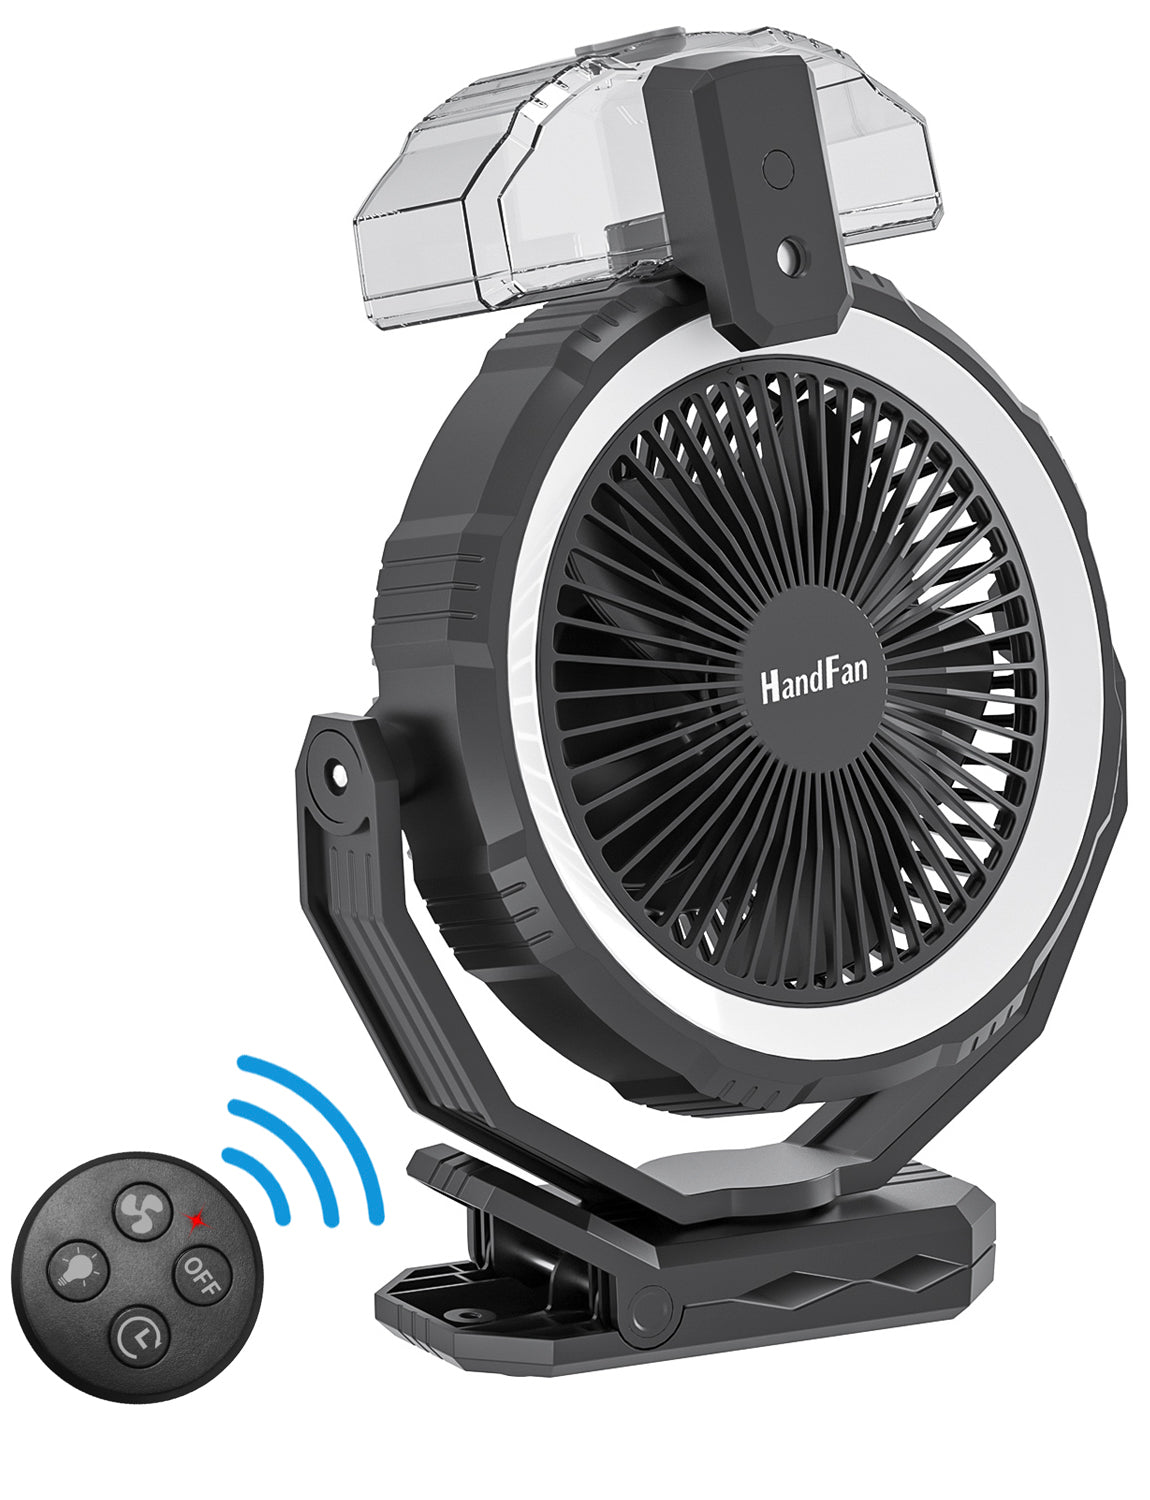 HandFan Table fan with misting and light